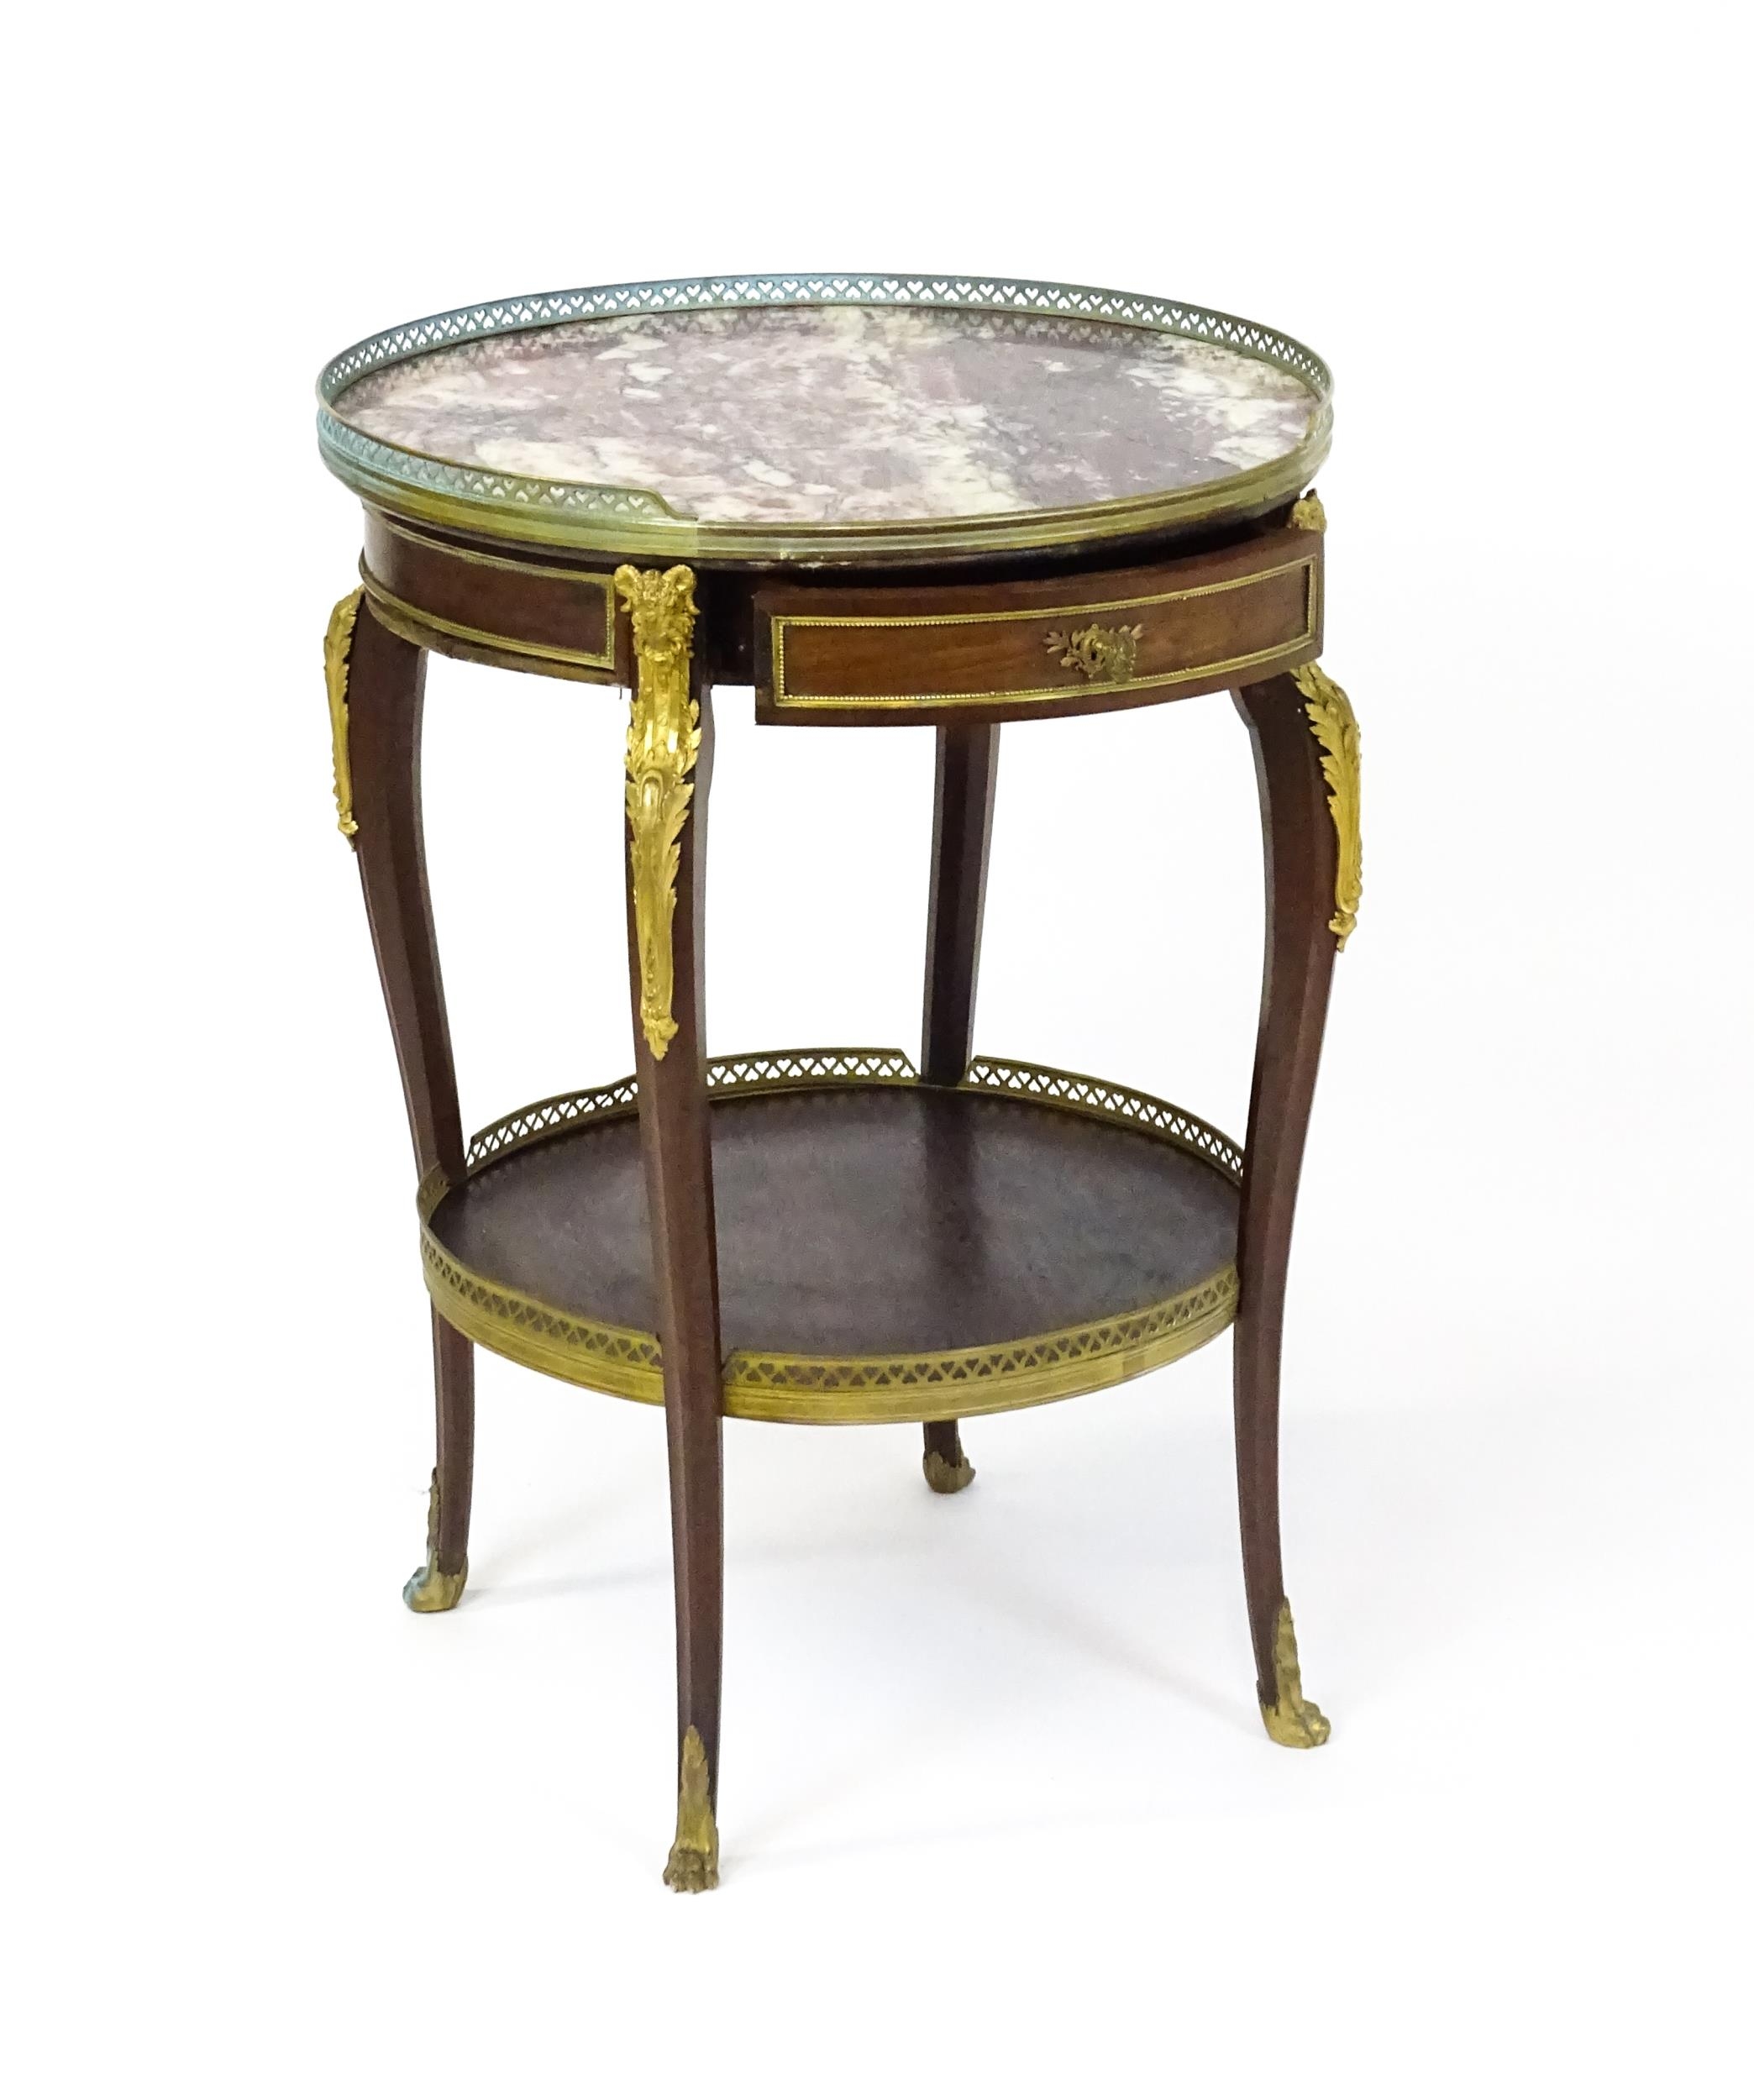 A 19thC rosewood and marble topped side table surmounted by a pierced surround and having a single - Image 8 of 10